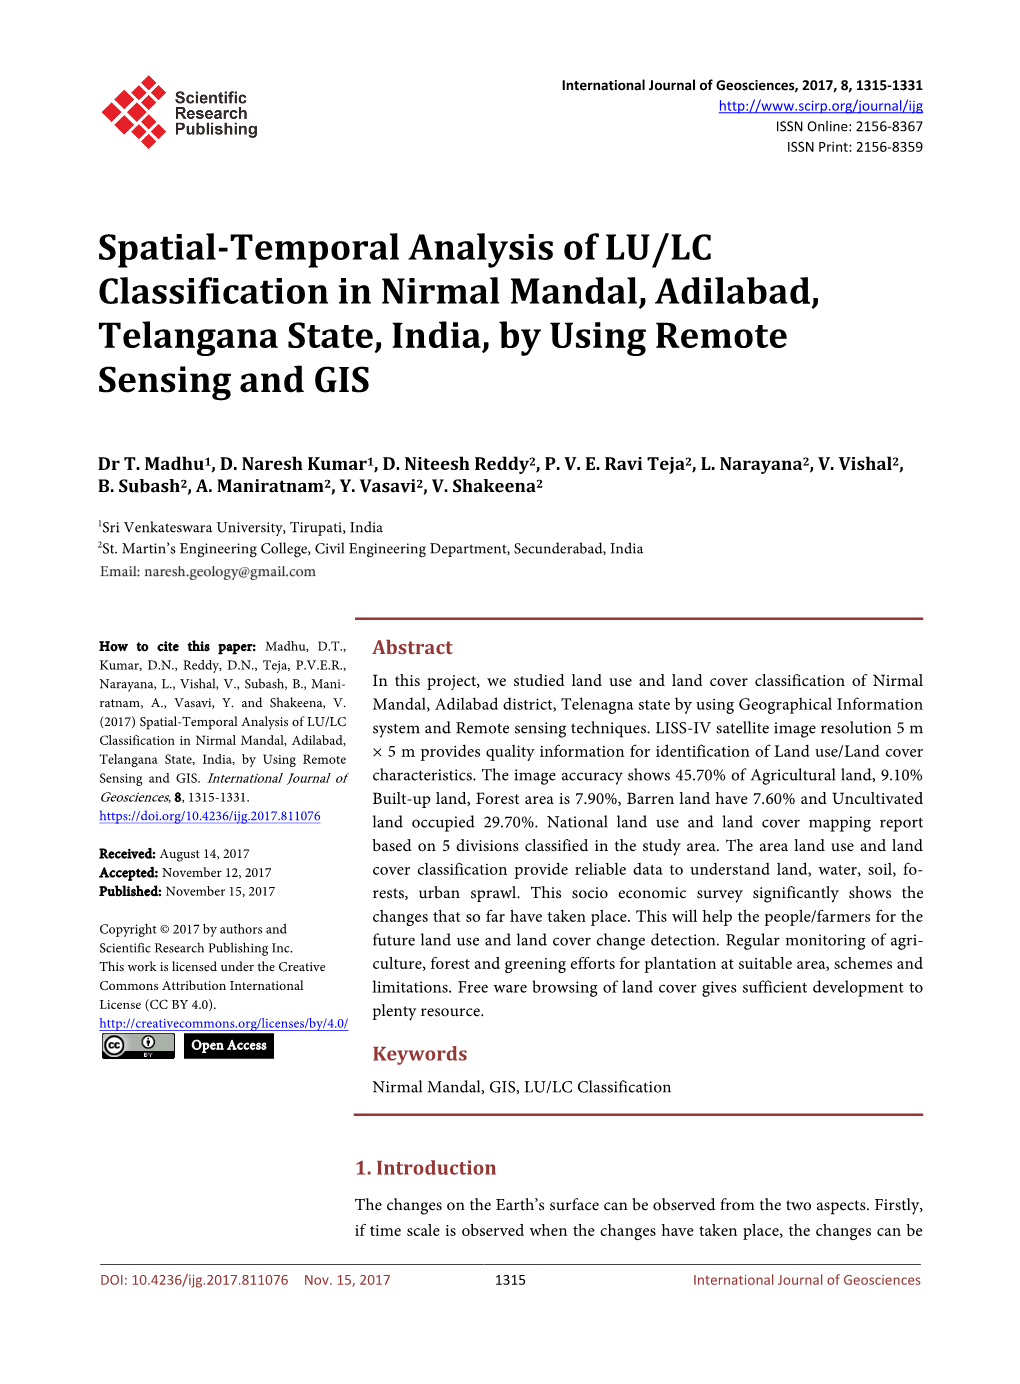 Spatial-Temporal Analysis of LU/LC Classification in Nirmal Mandal, Adilabad, Telangana State, India, by Using Remote Sensing and GIS